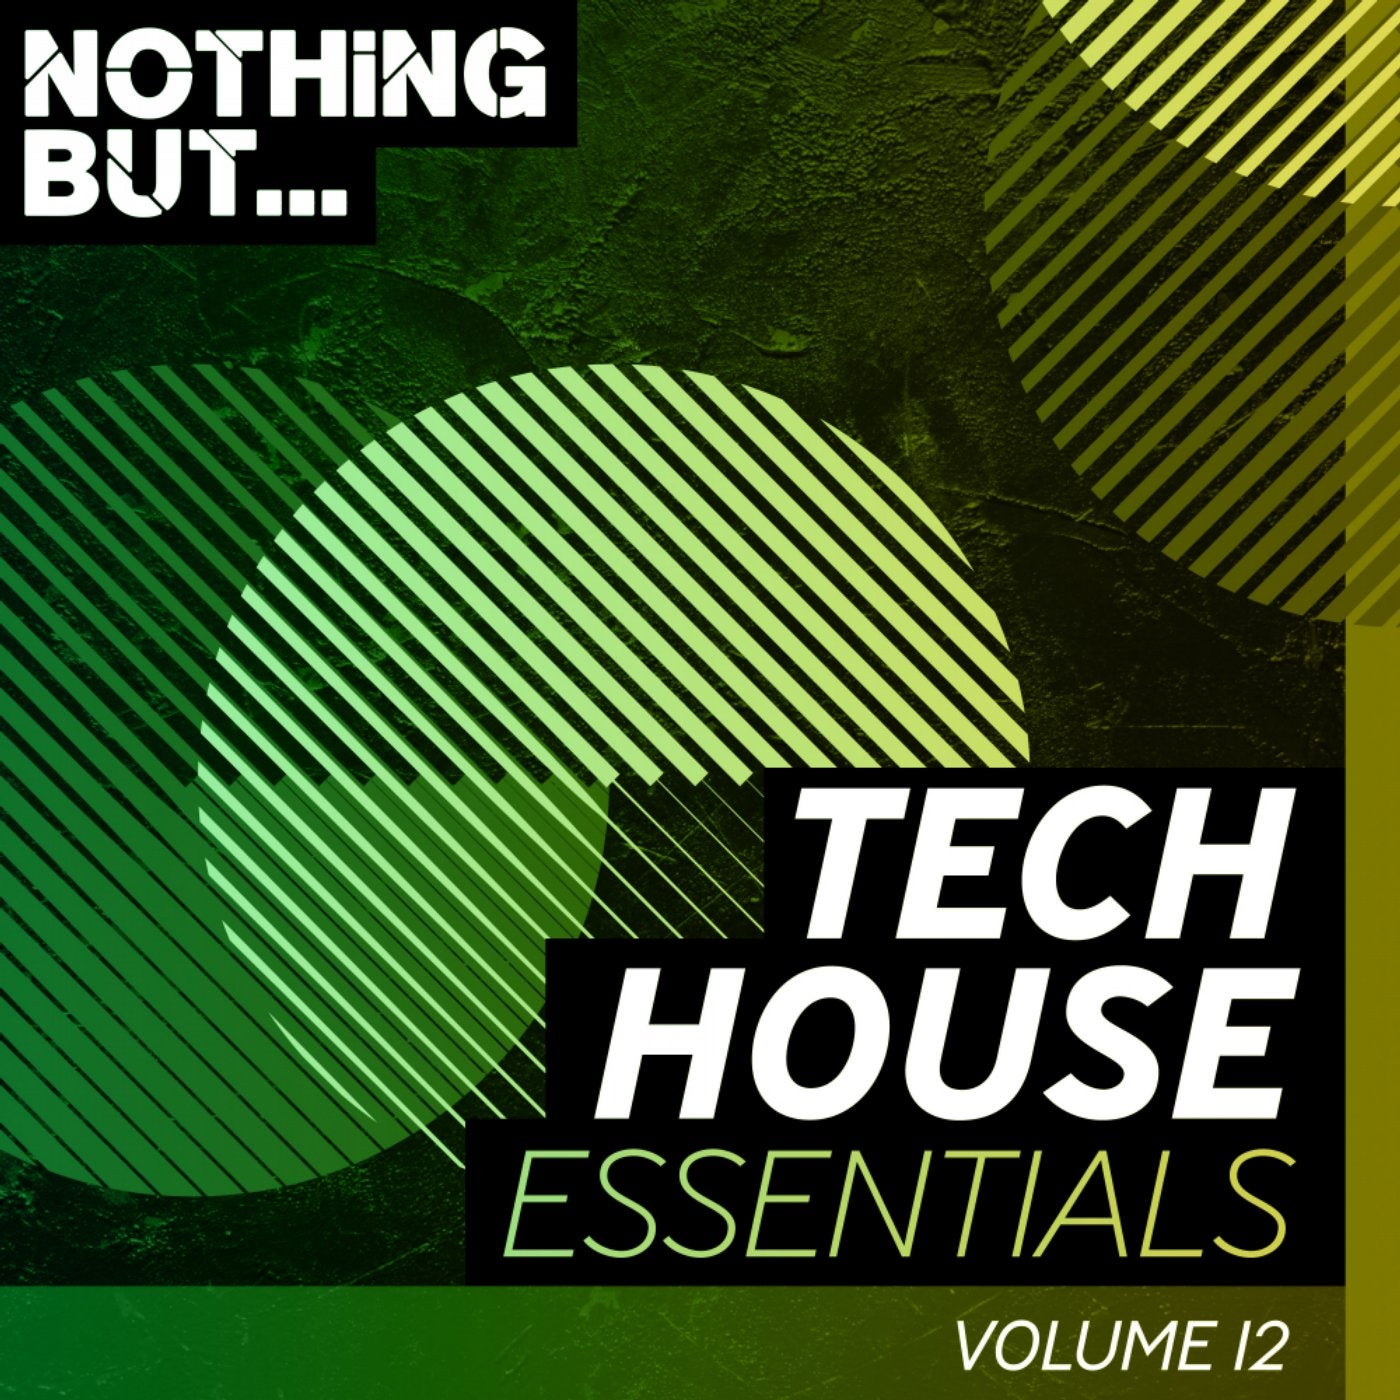 Nothing But... Tech House Essentials, Vol. 12